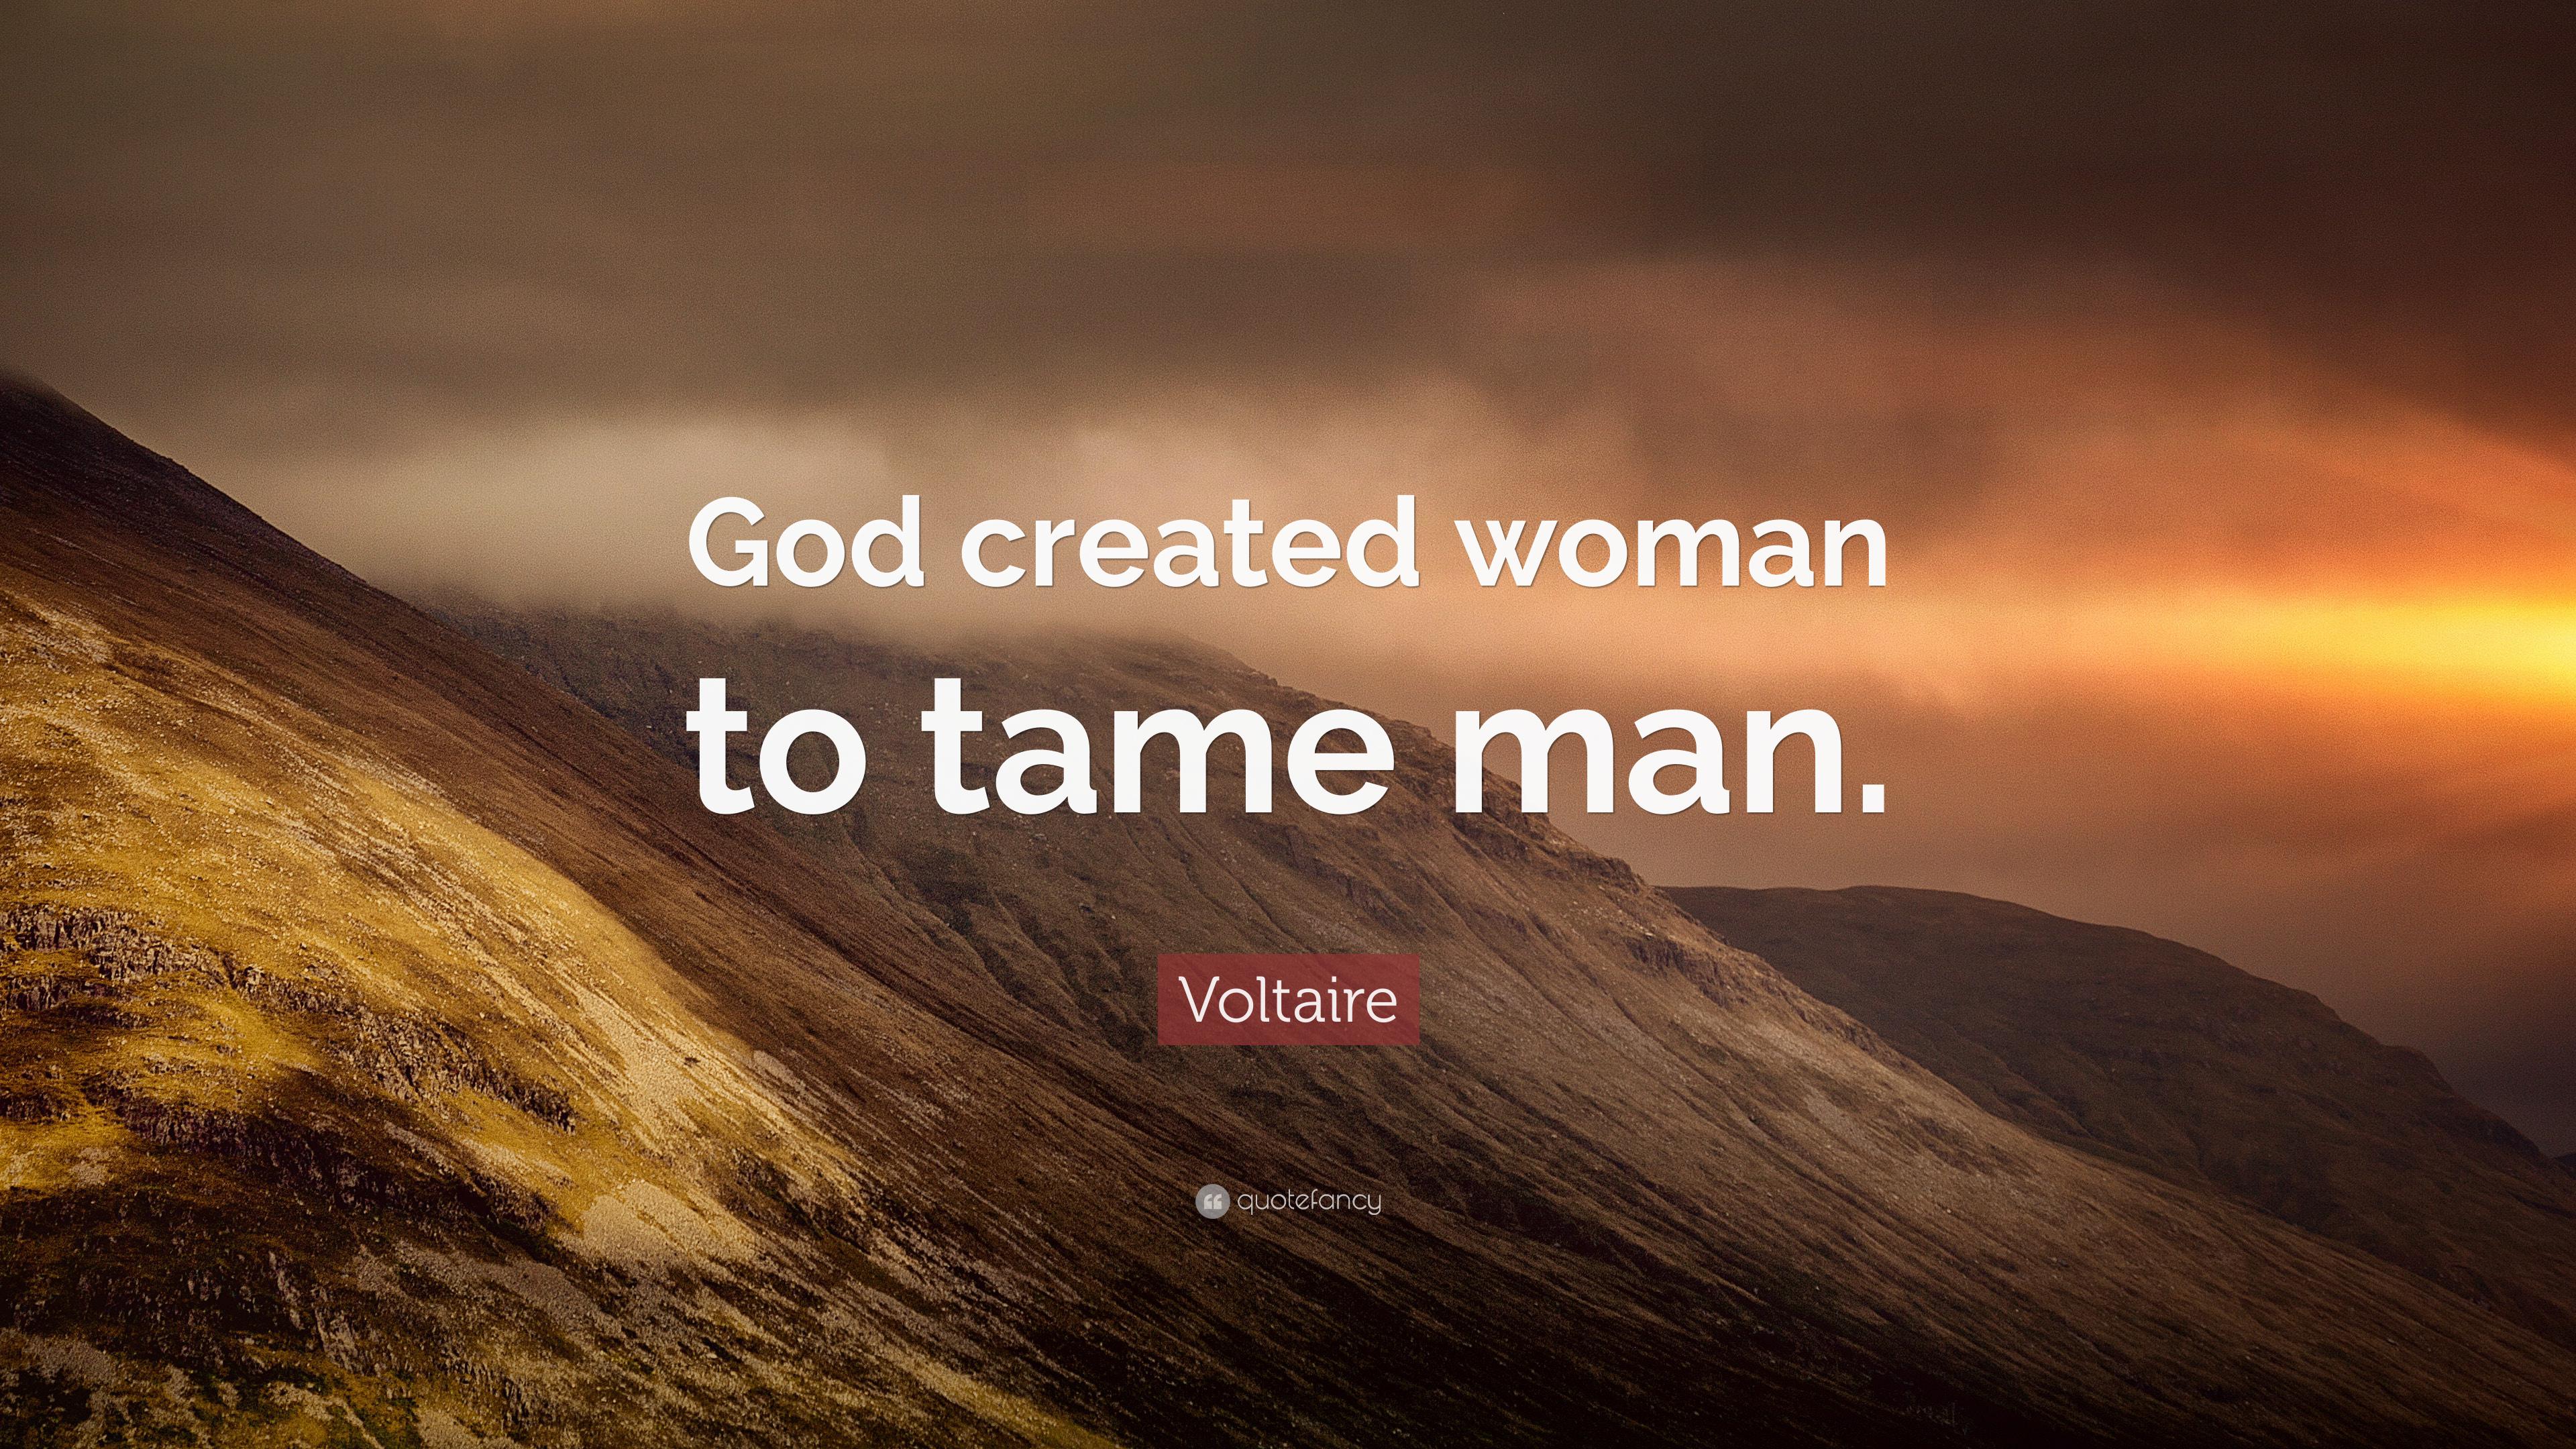 Voltaire Quote: “God created woman to tame man.” 10 wallpaper